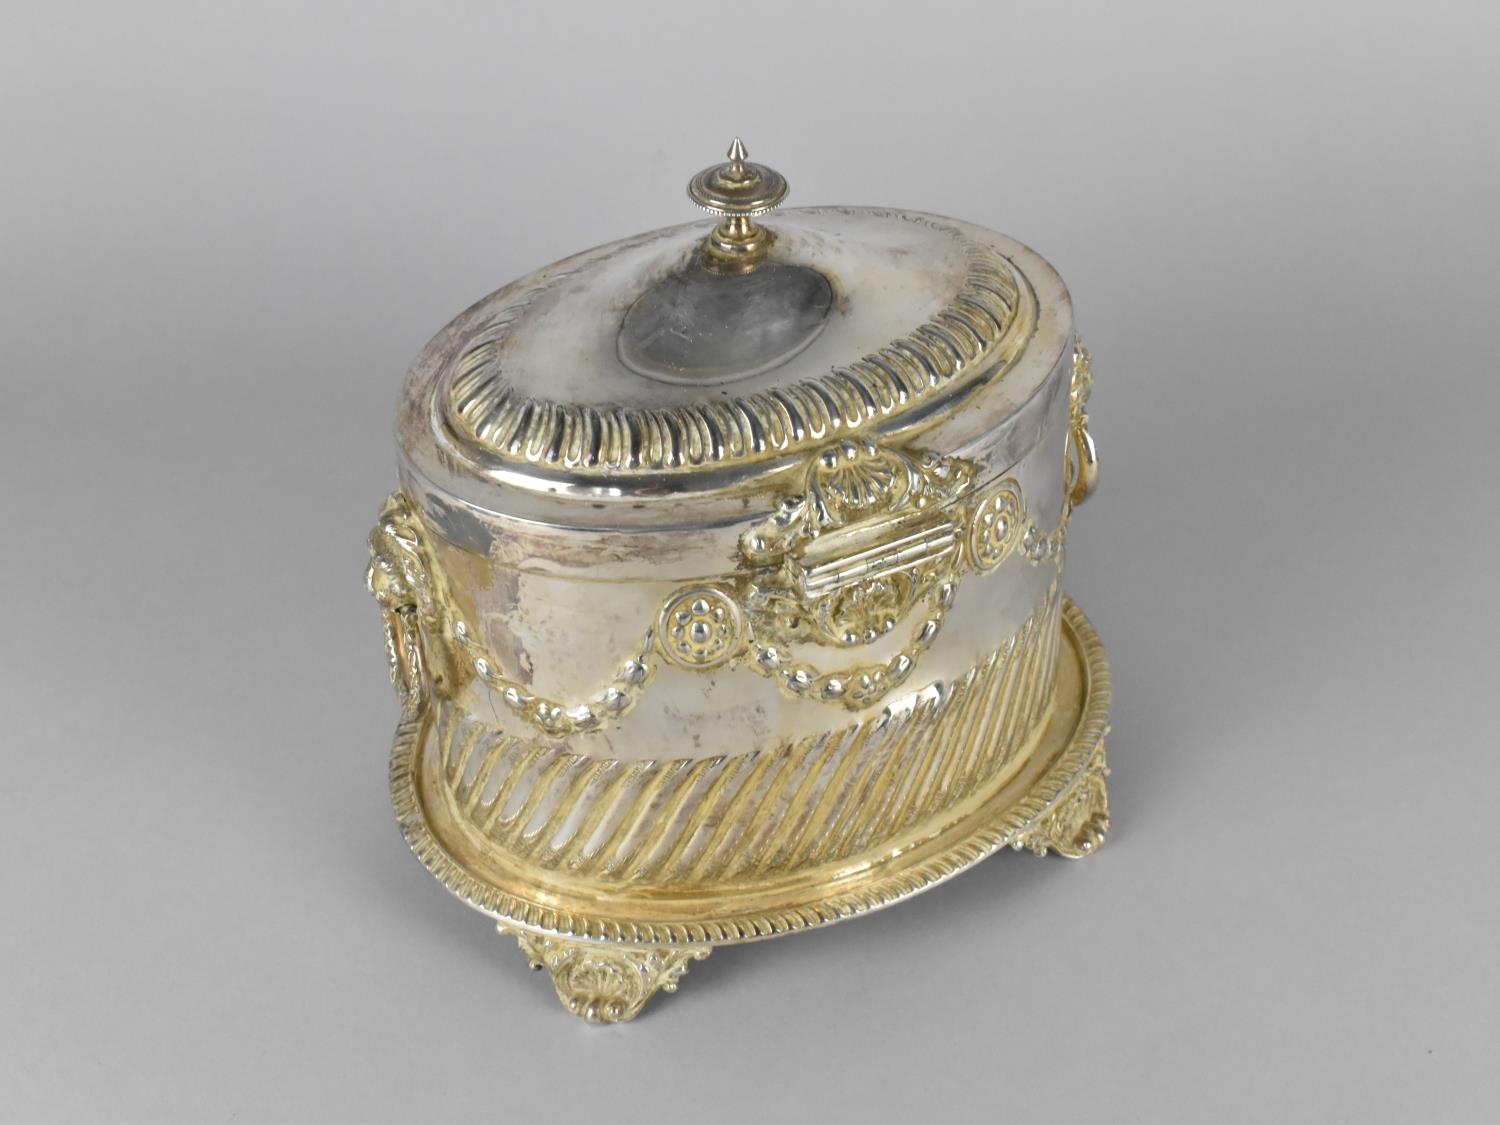 An Early 20th Century Silver Plated Presentation Biscuit Barrel of Oval Form, the Body with Lion - Image 3 of 3